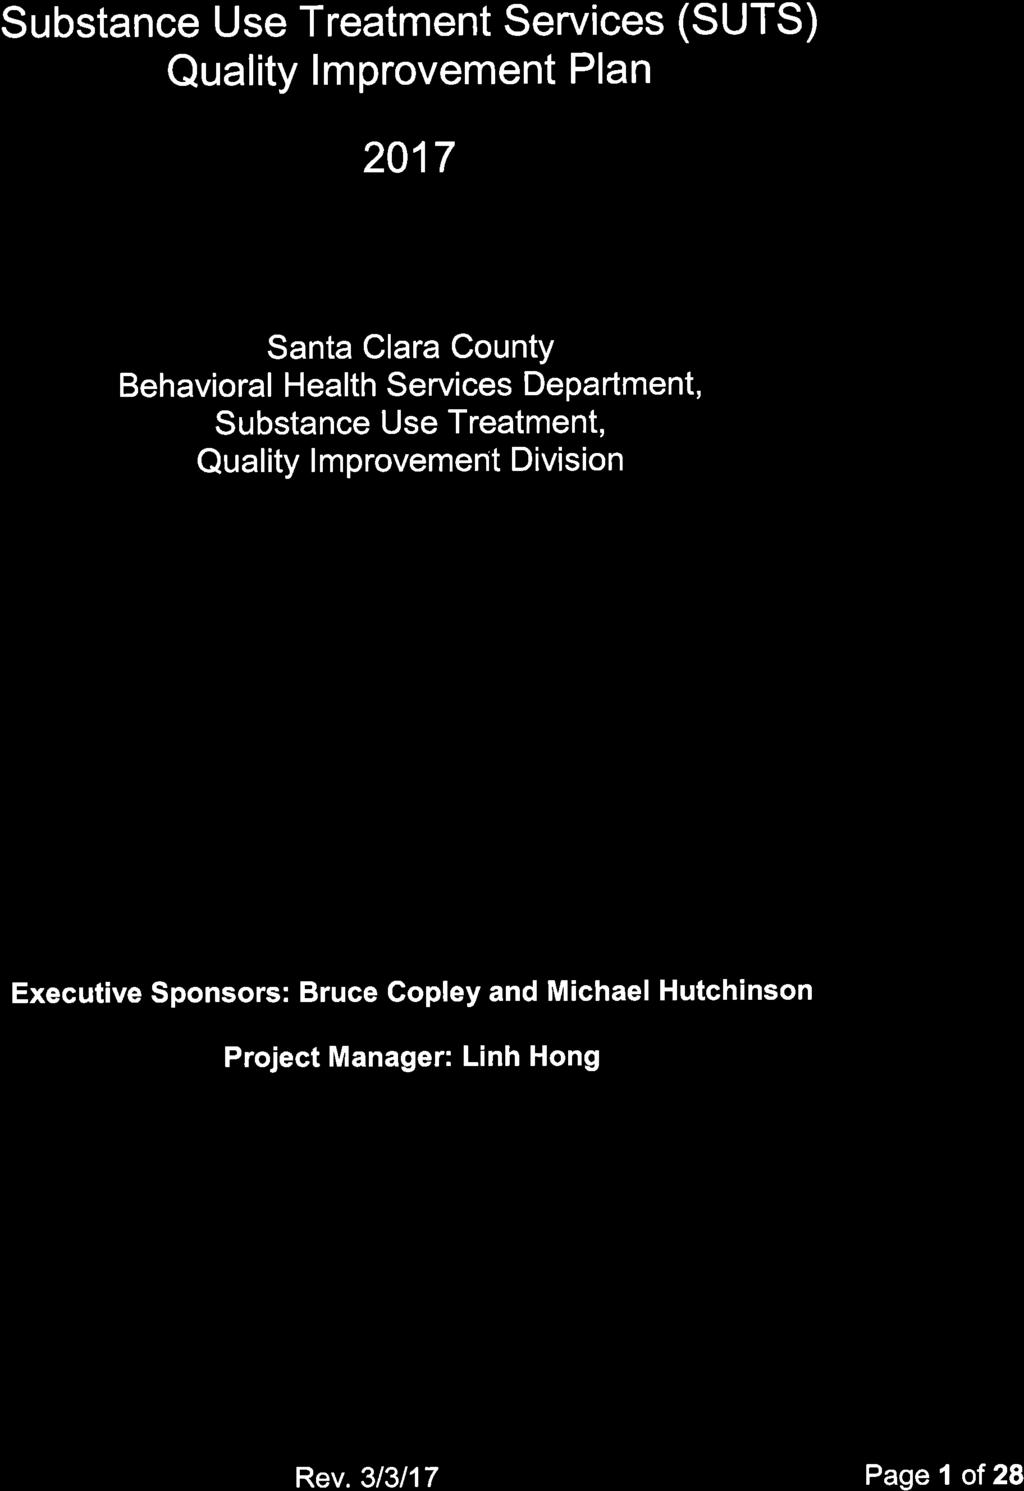 Substance Use Treatment Services (SUTS) Ouality lmprovement Plan 2017 Santa Clara County Behavioral Health Services Department, Substance Use